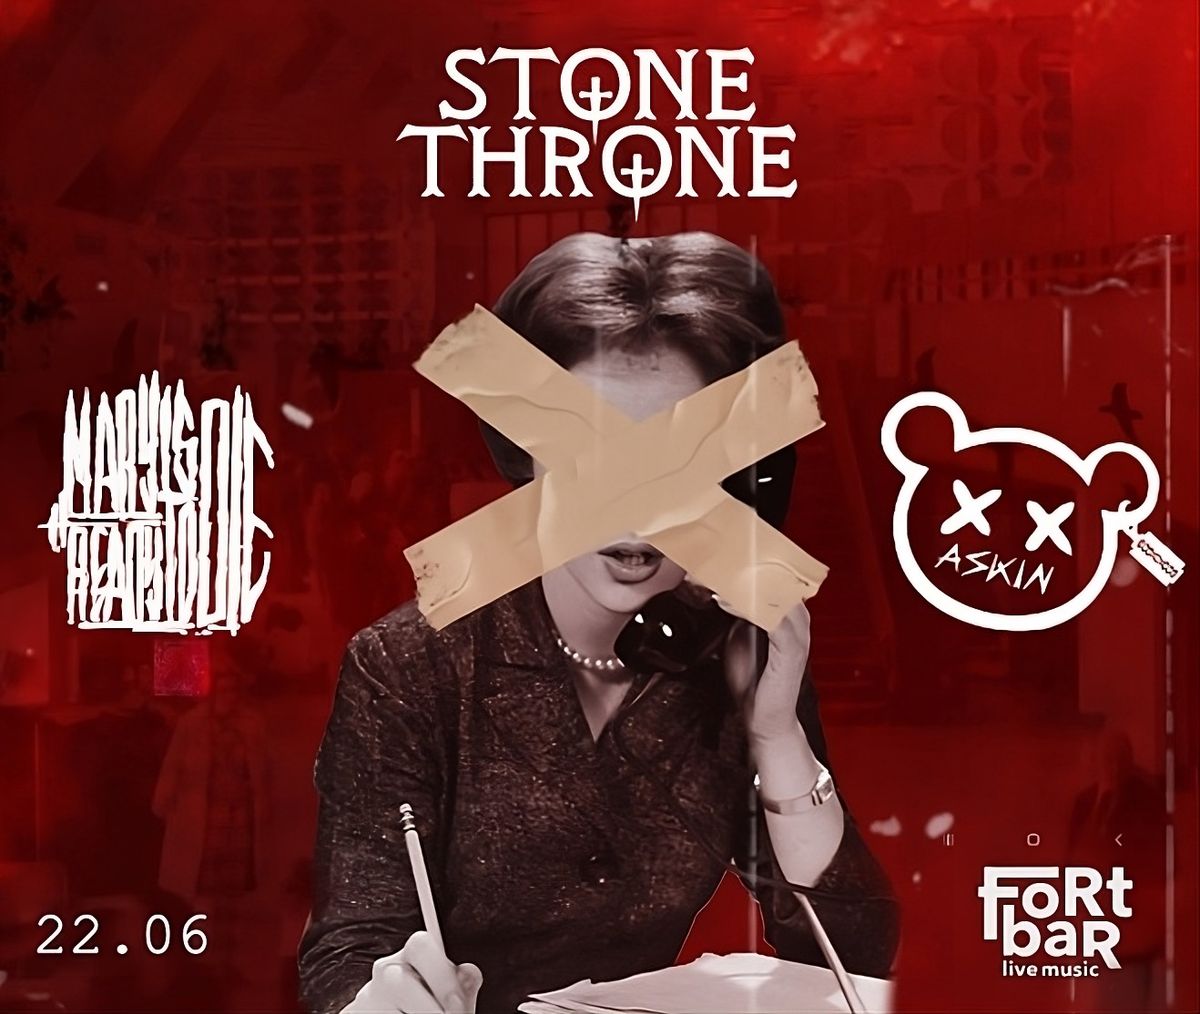 ASKIN(LV) x MARY IS READY TO DIE(LV) x STONE THRONE(EST) @Fort Bar